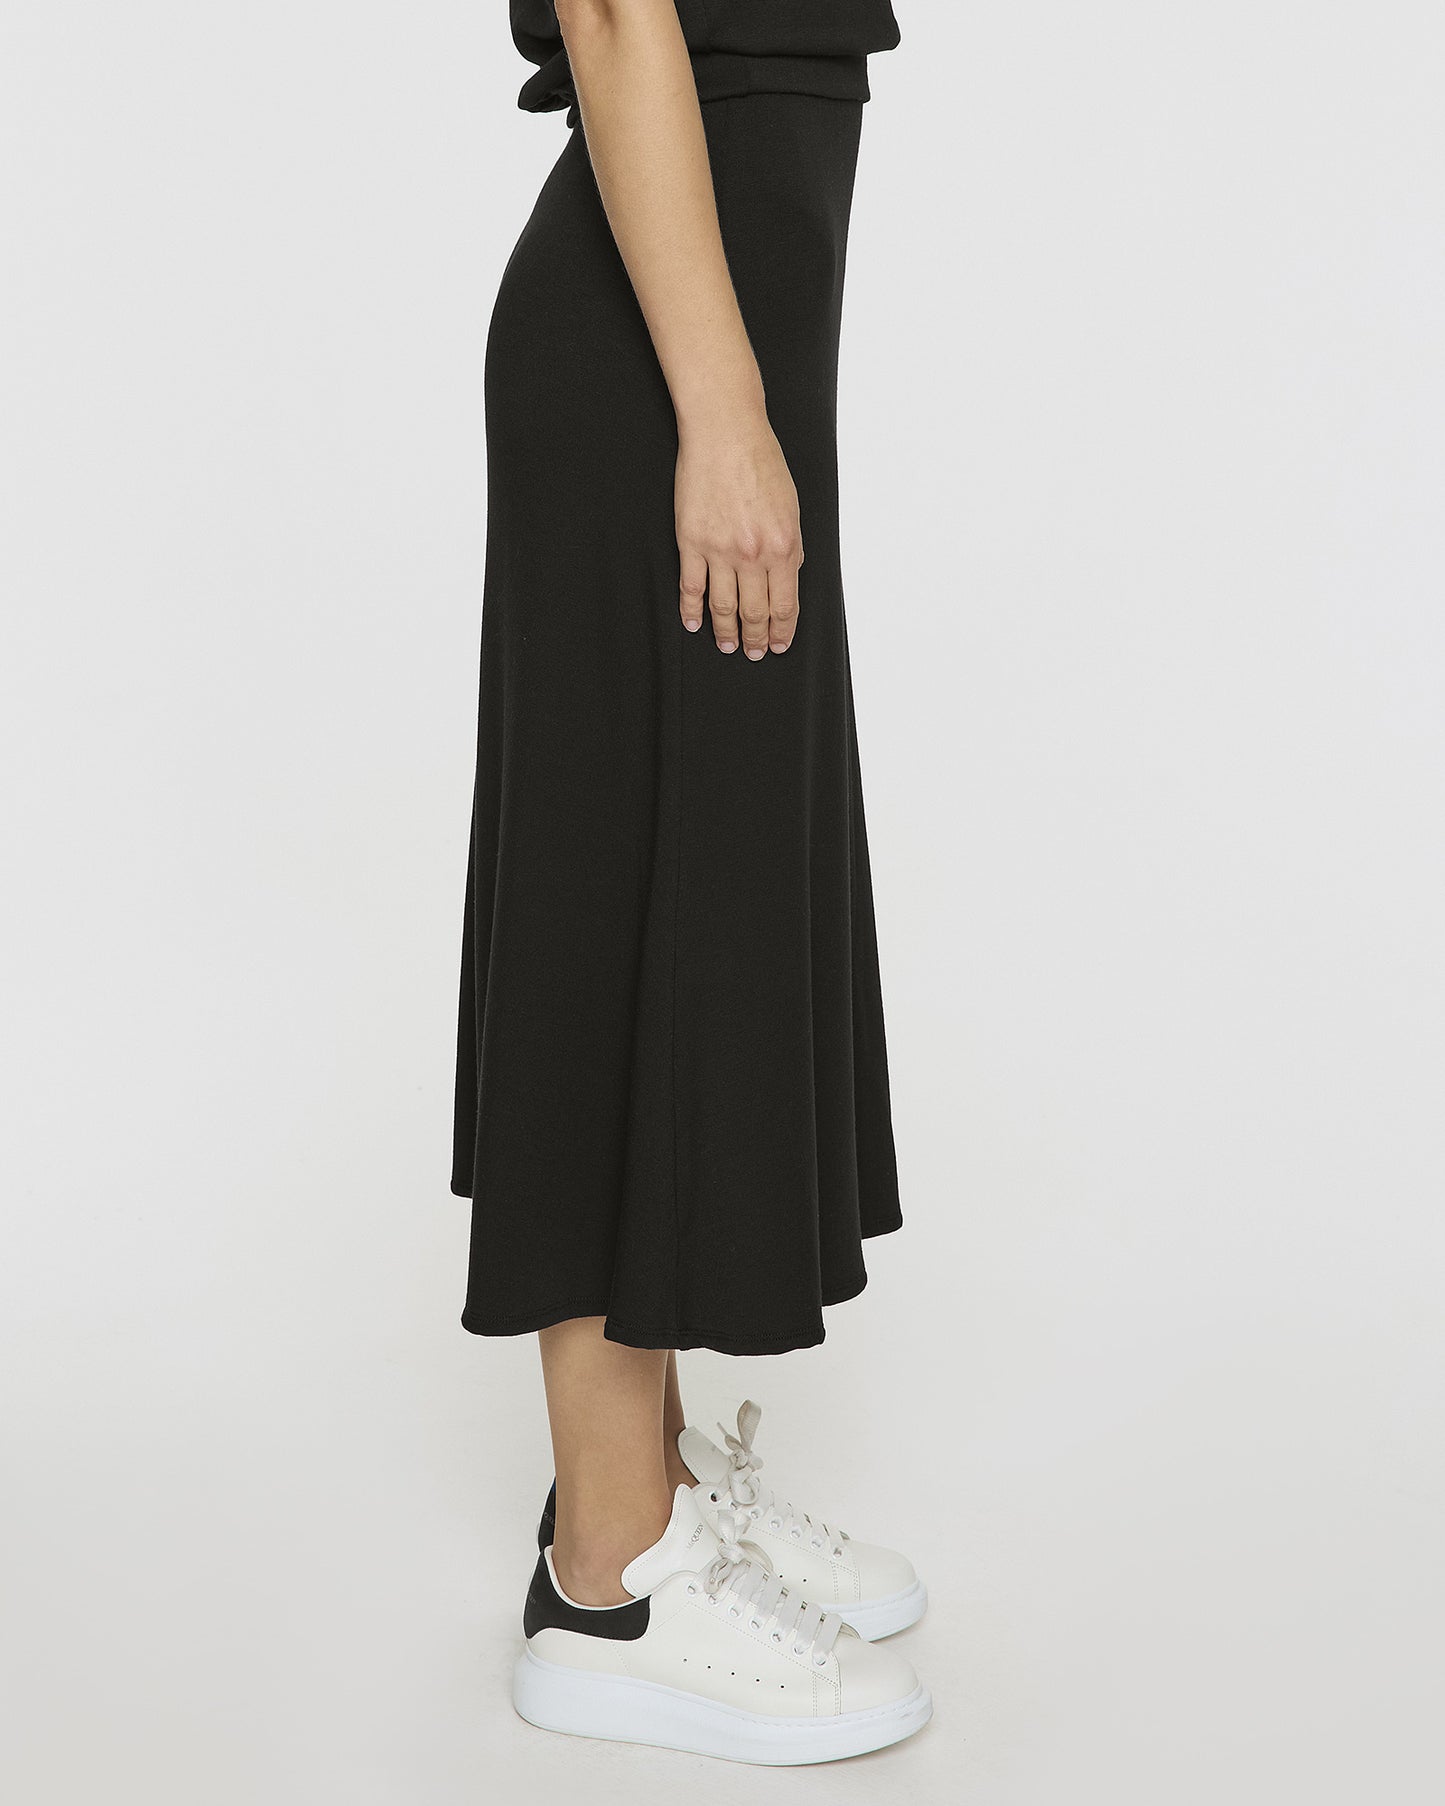 Coco | The A-Line Skirt